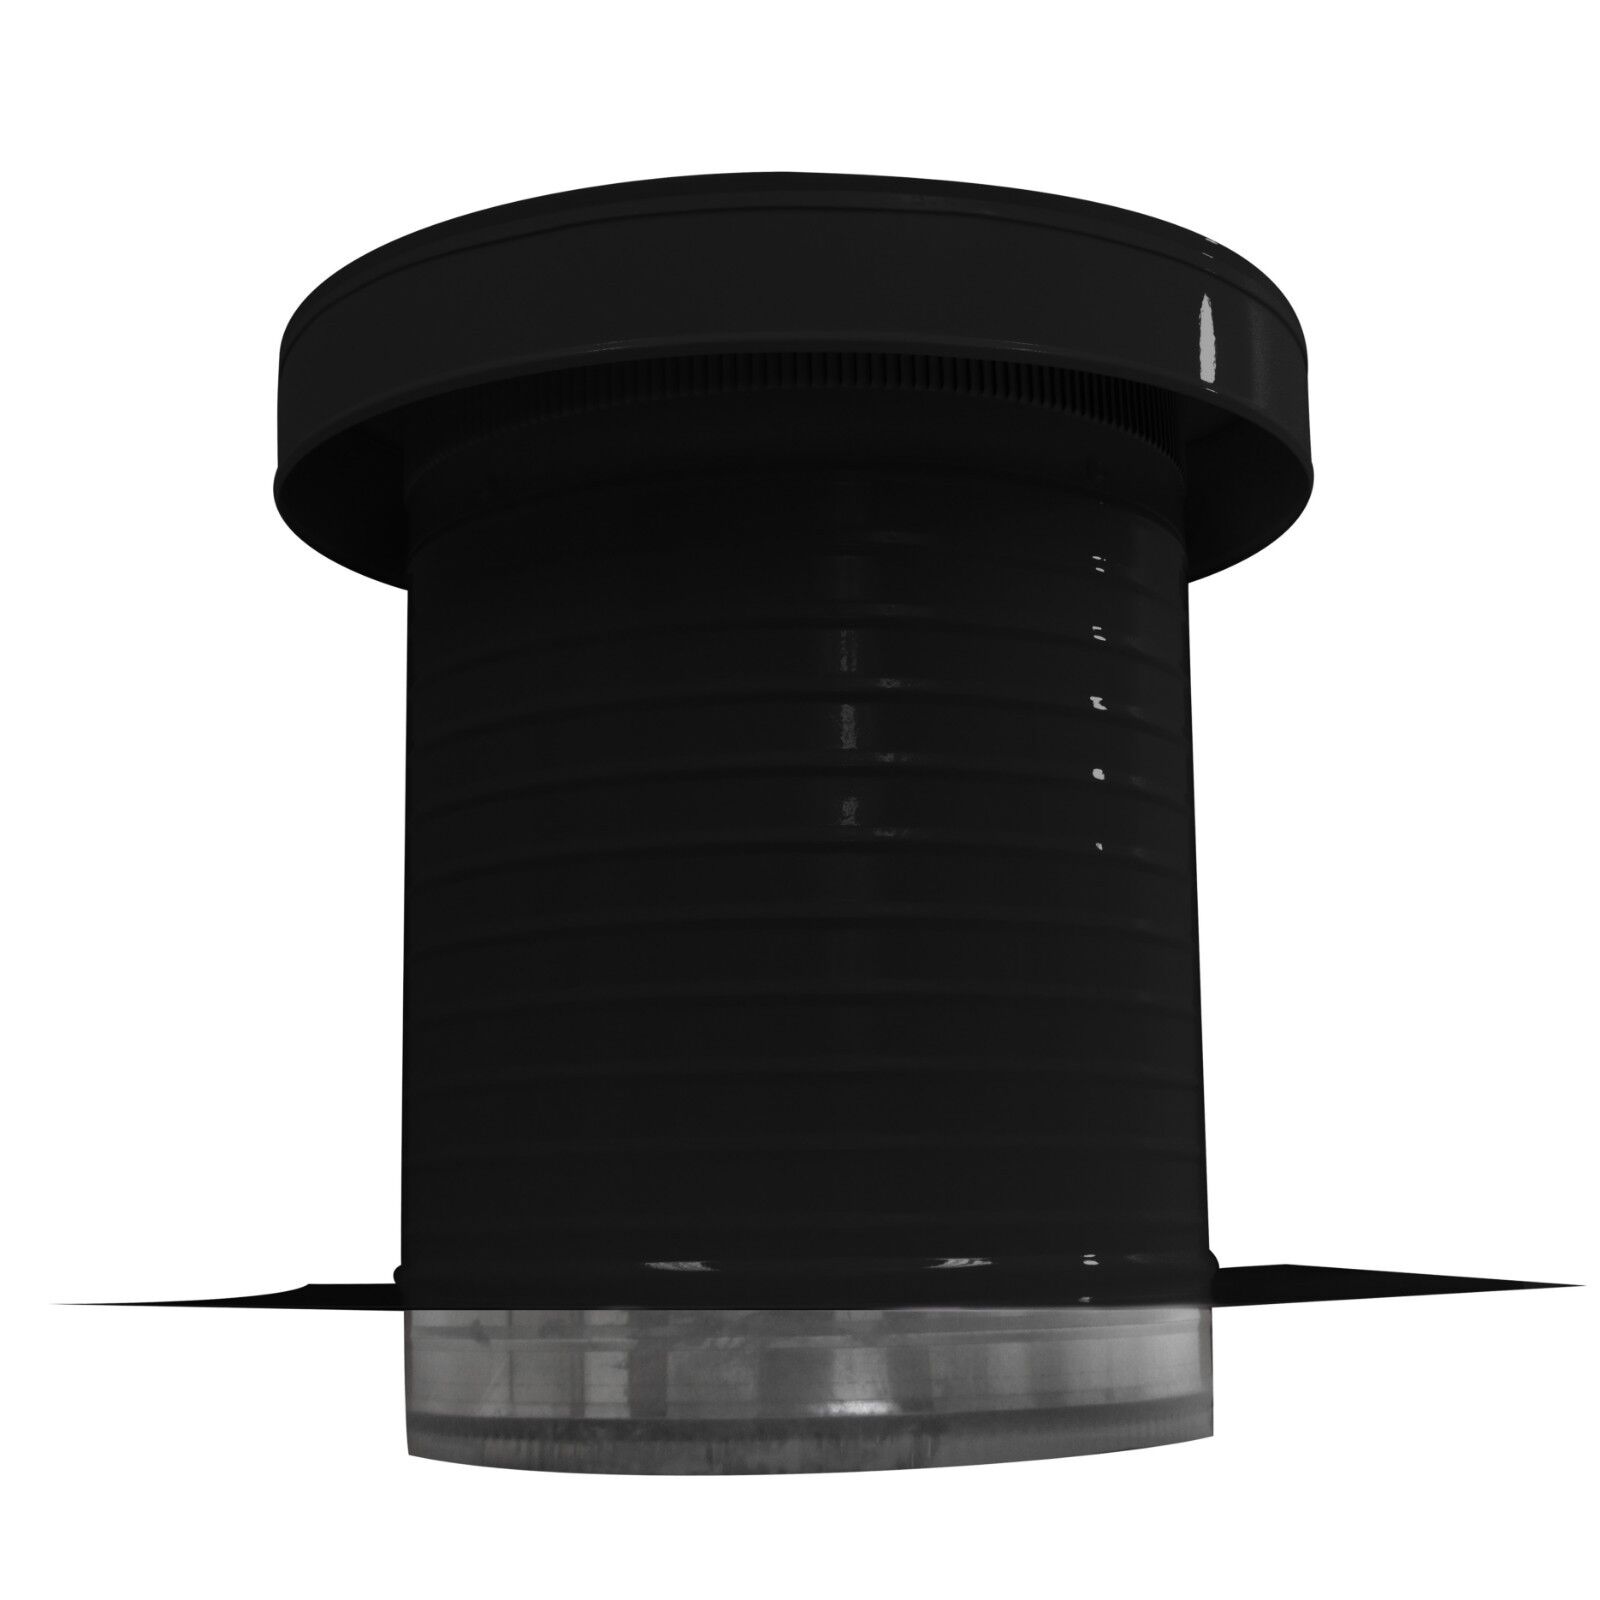 12 Inch Diameter Aluminum Keepa Roof Jack Vent Cap With Tail Pipe In Black